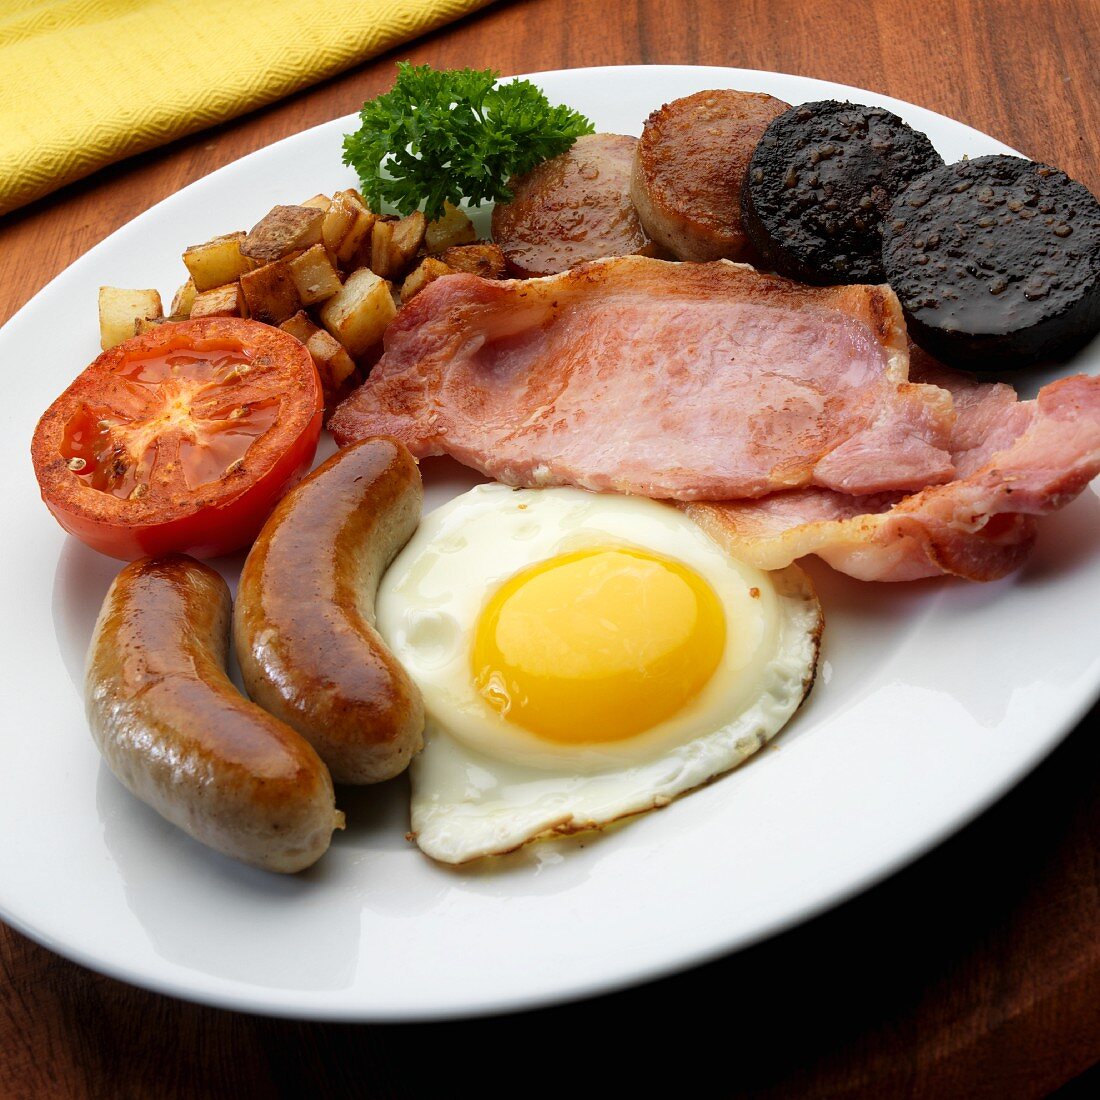 igourmet Full Irish Breakfast Gift Basket - Perfect For St. Patrick's Day-  Irelands Best Breakfast Foods, From Irish Back Bacon, Black Pudding And  Bangers To Butter, Delicious Irish Jam And Tea 